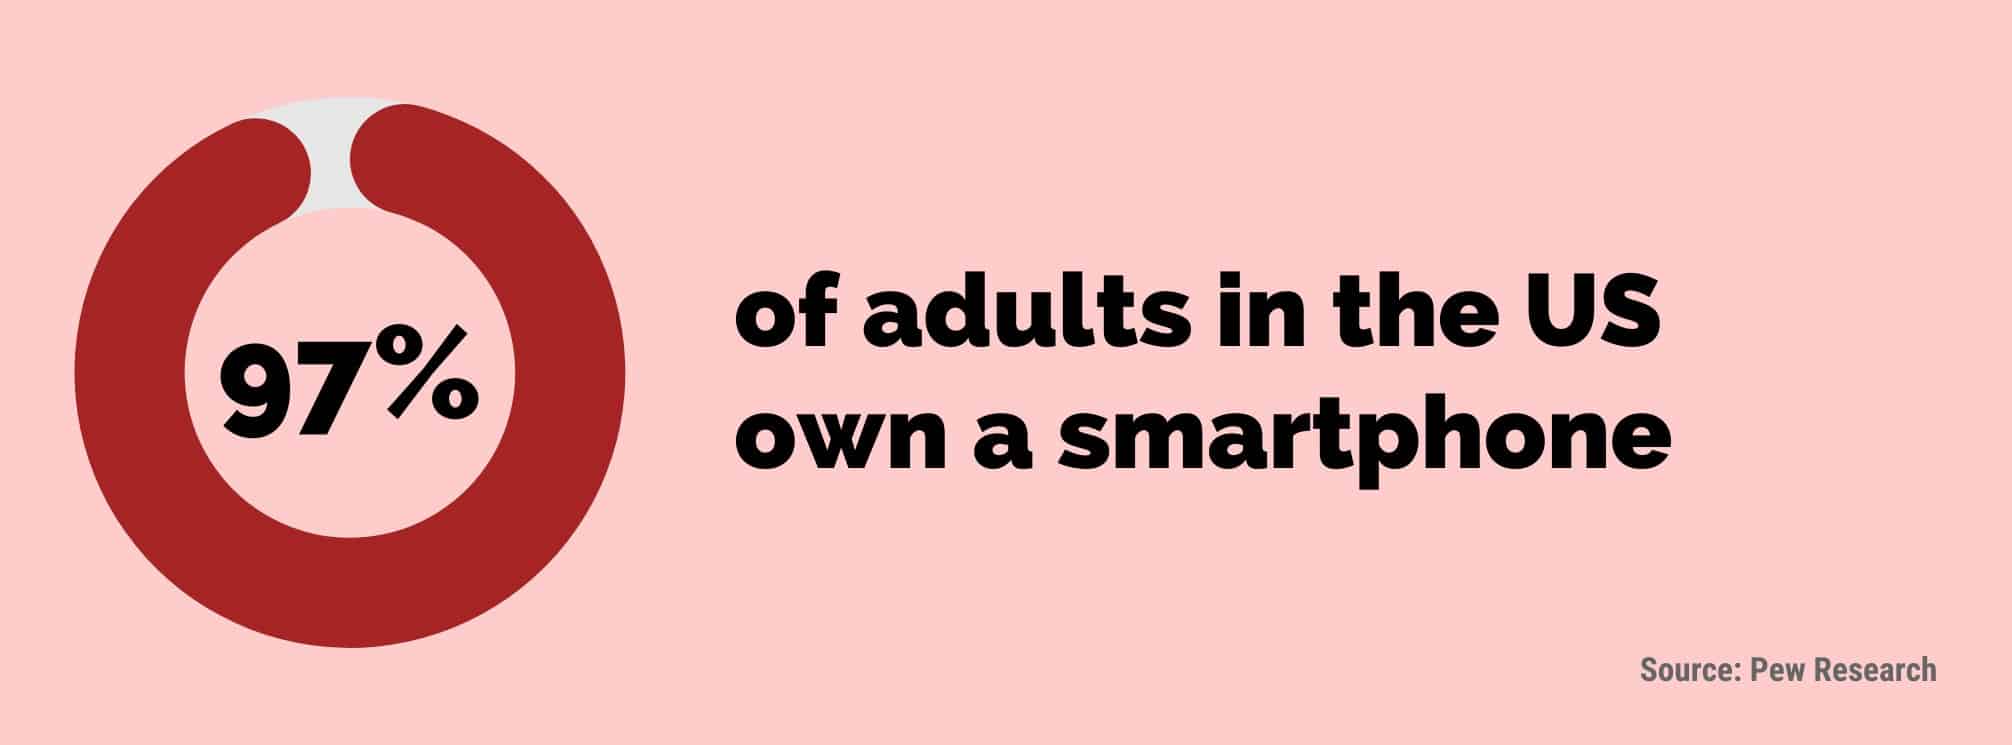 graphic showing a statistic: 97% of adults in the US own a smartphone. Source: PEW Research